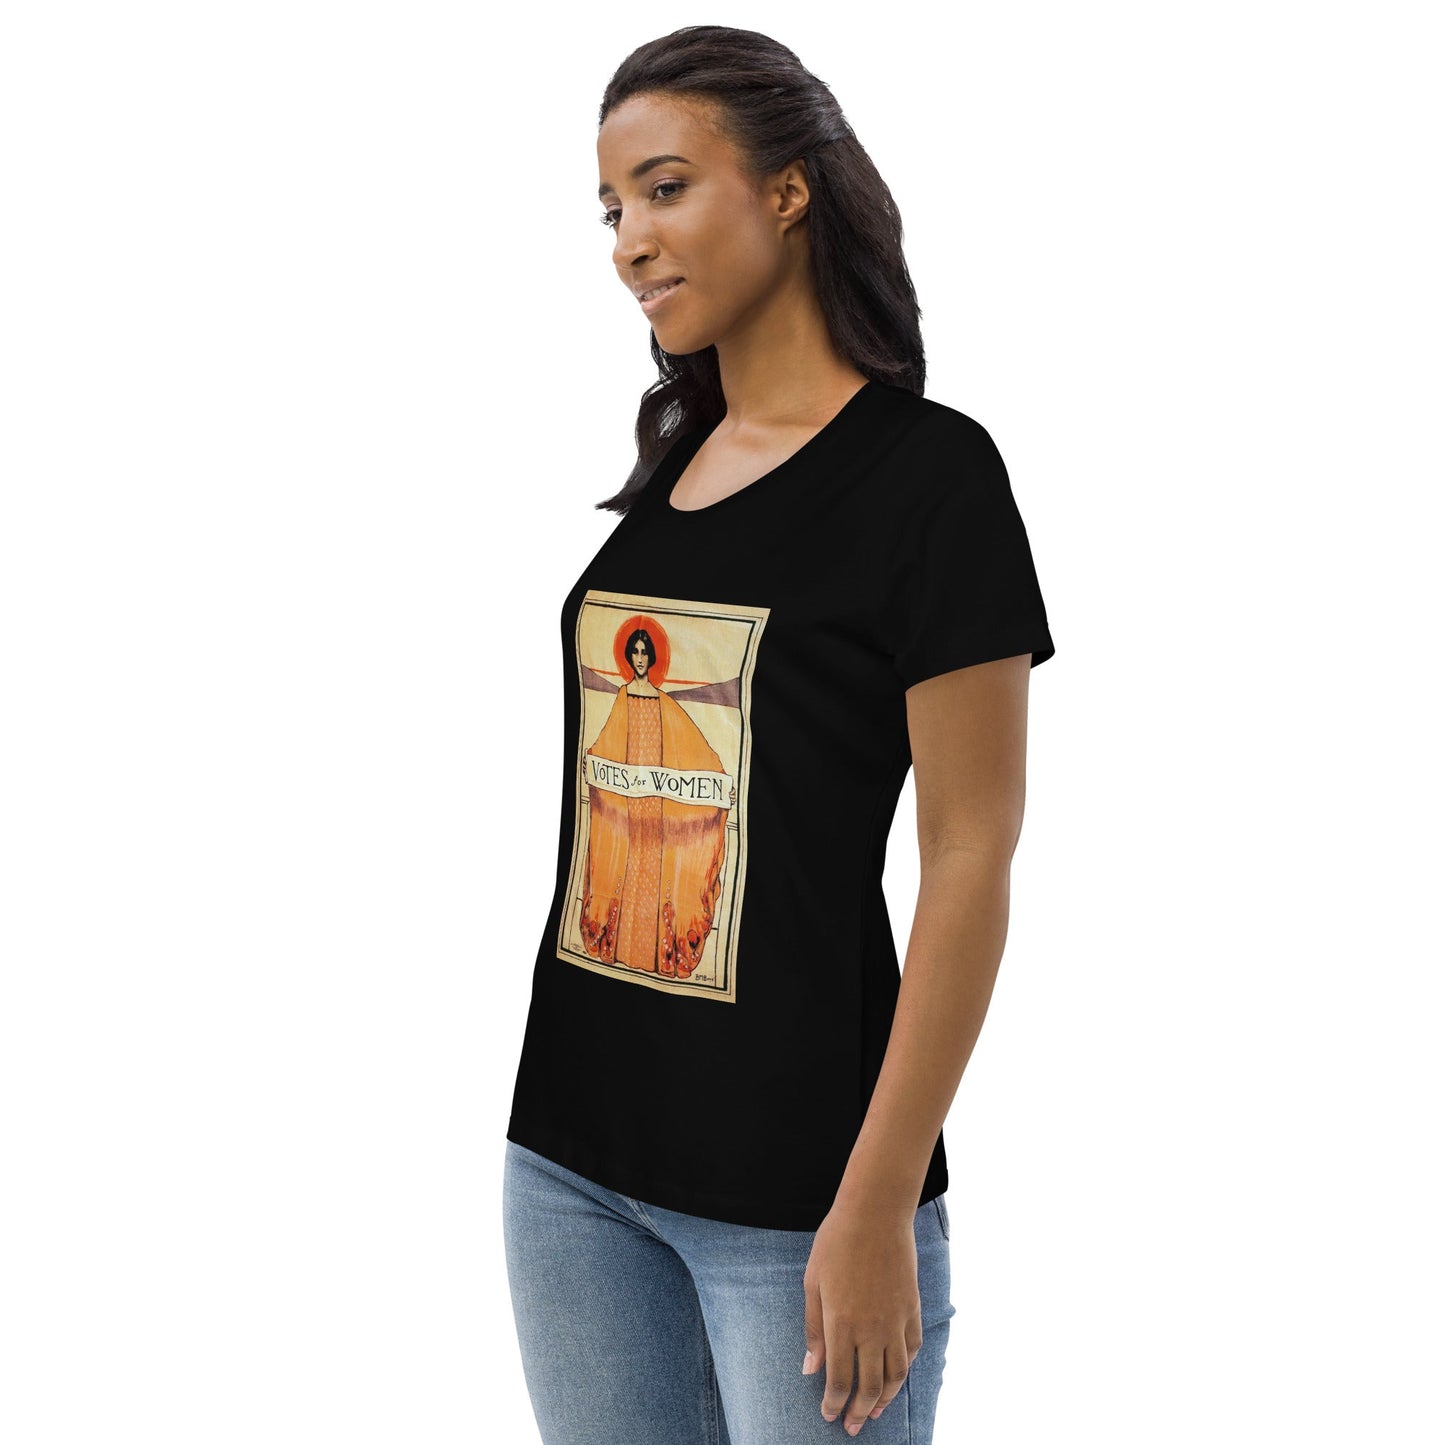 Votes For Women - Women's Fitted Eco Tee - Souled Out World